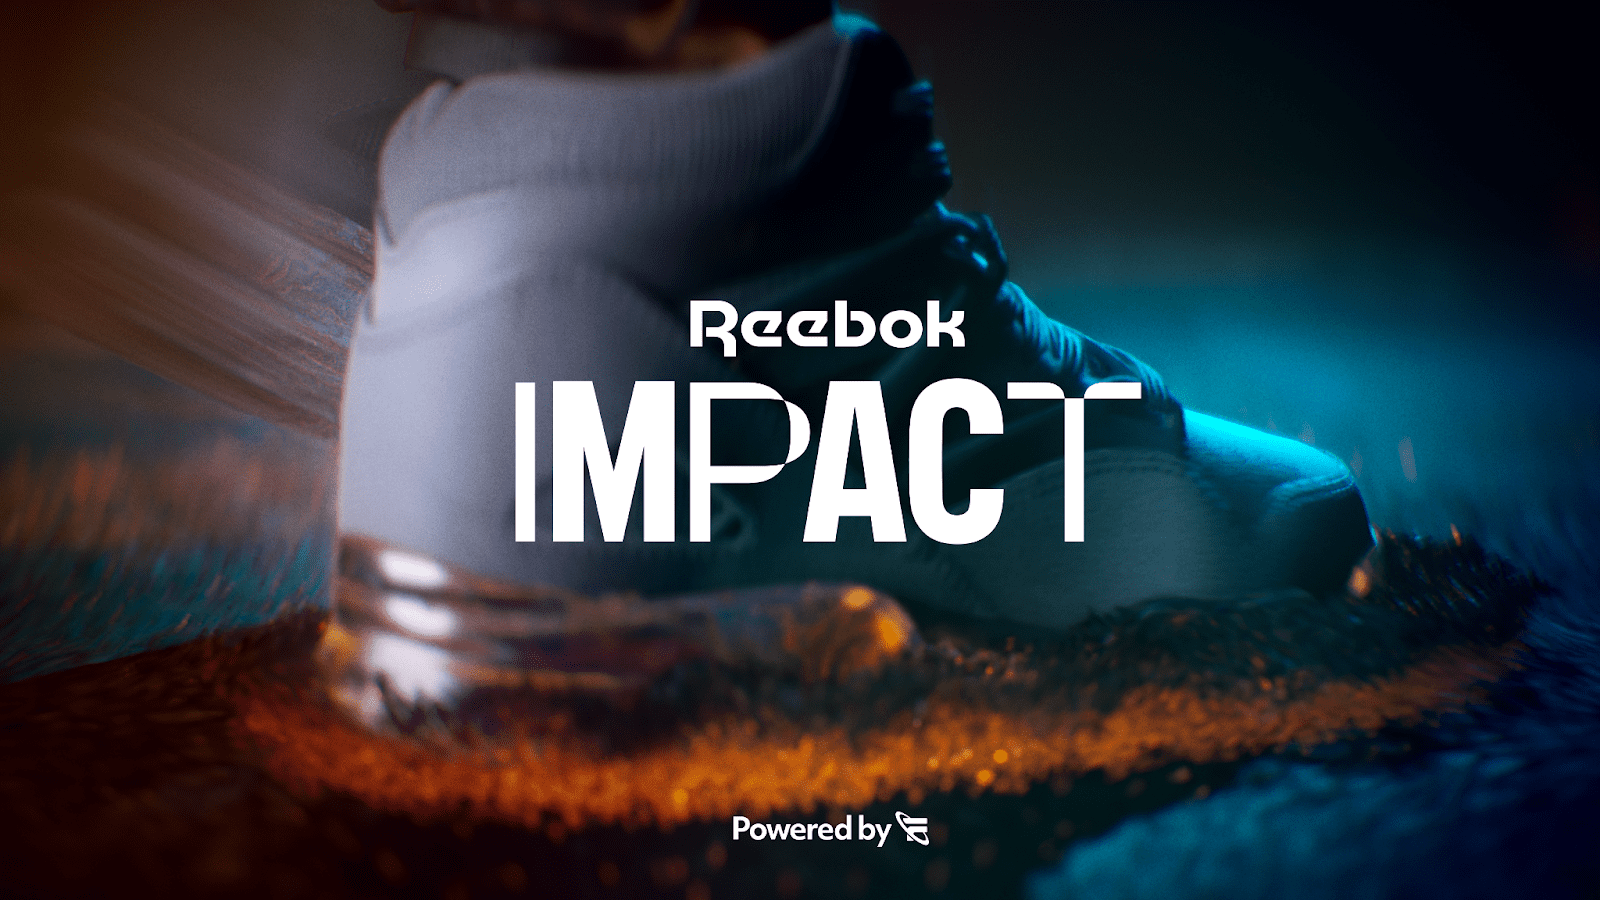 Reebok and Futureverse Collaborate on "Reebok Impact" for Web3 Experiences